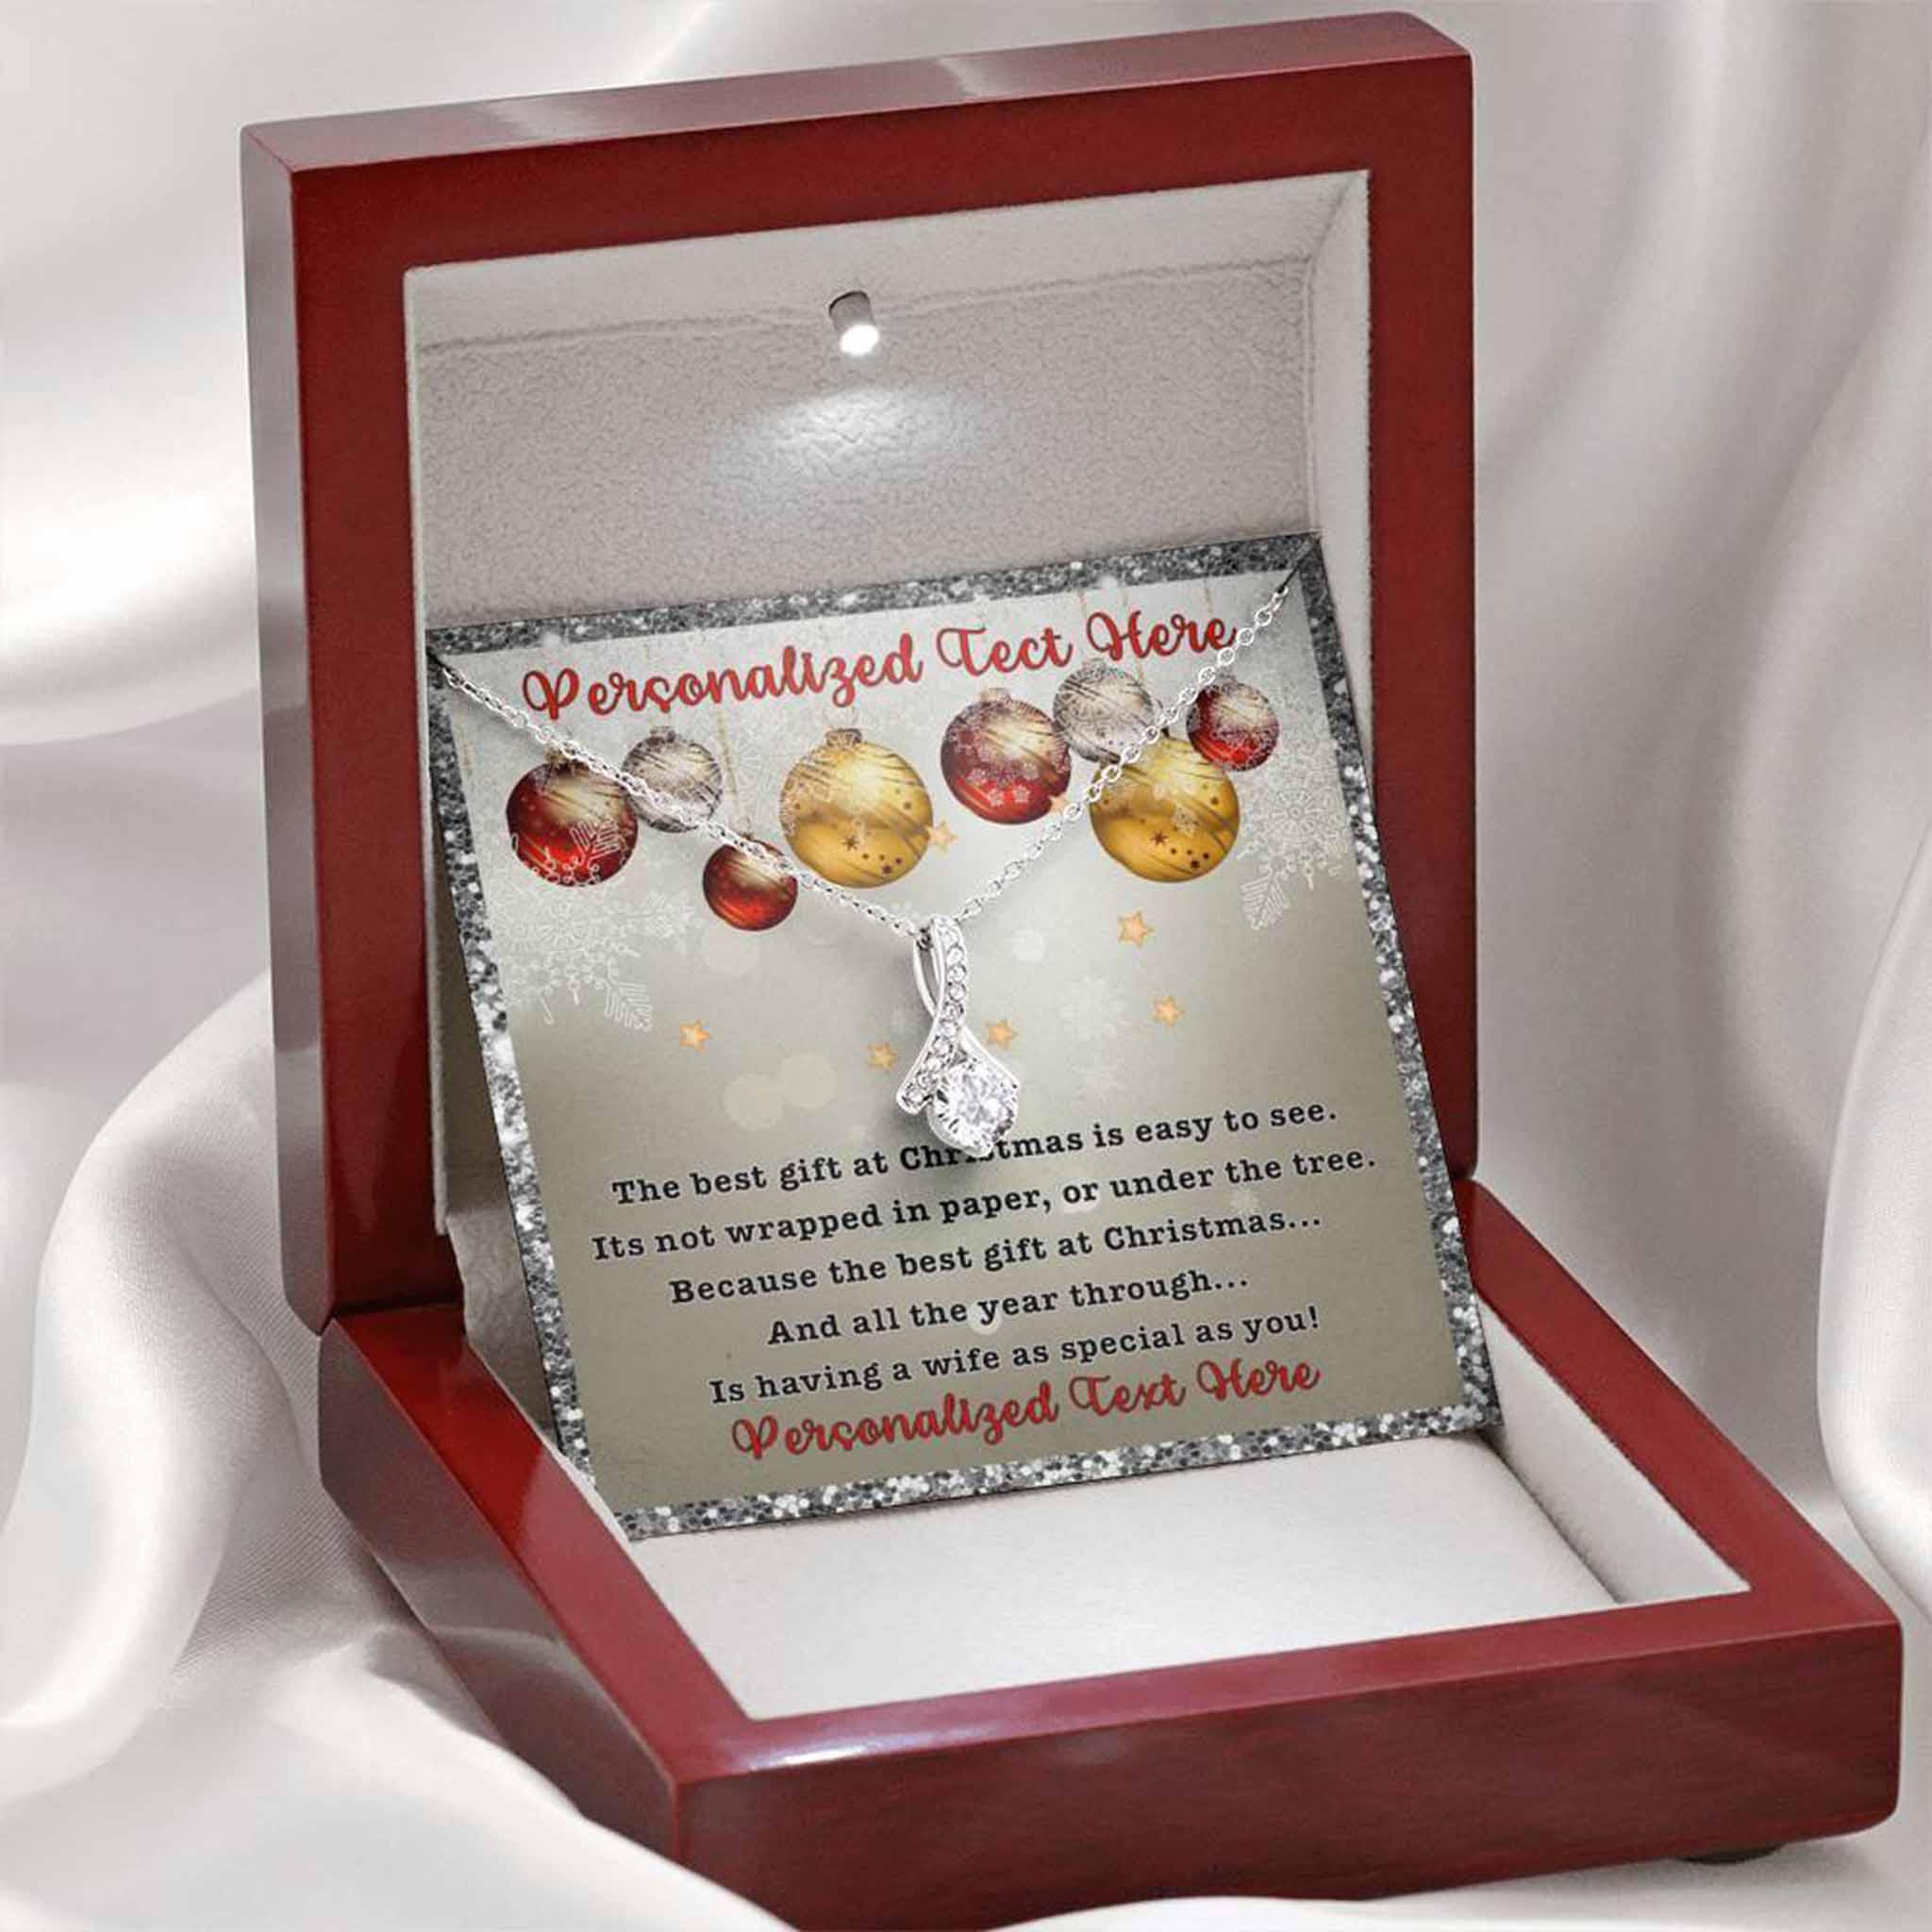 Alluring Beauty Necklace Wife Best Gift At Christmas Personalized Insert CardCustomly Gifts